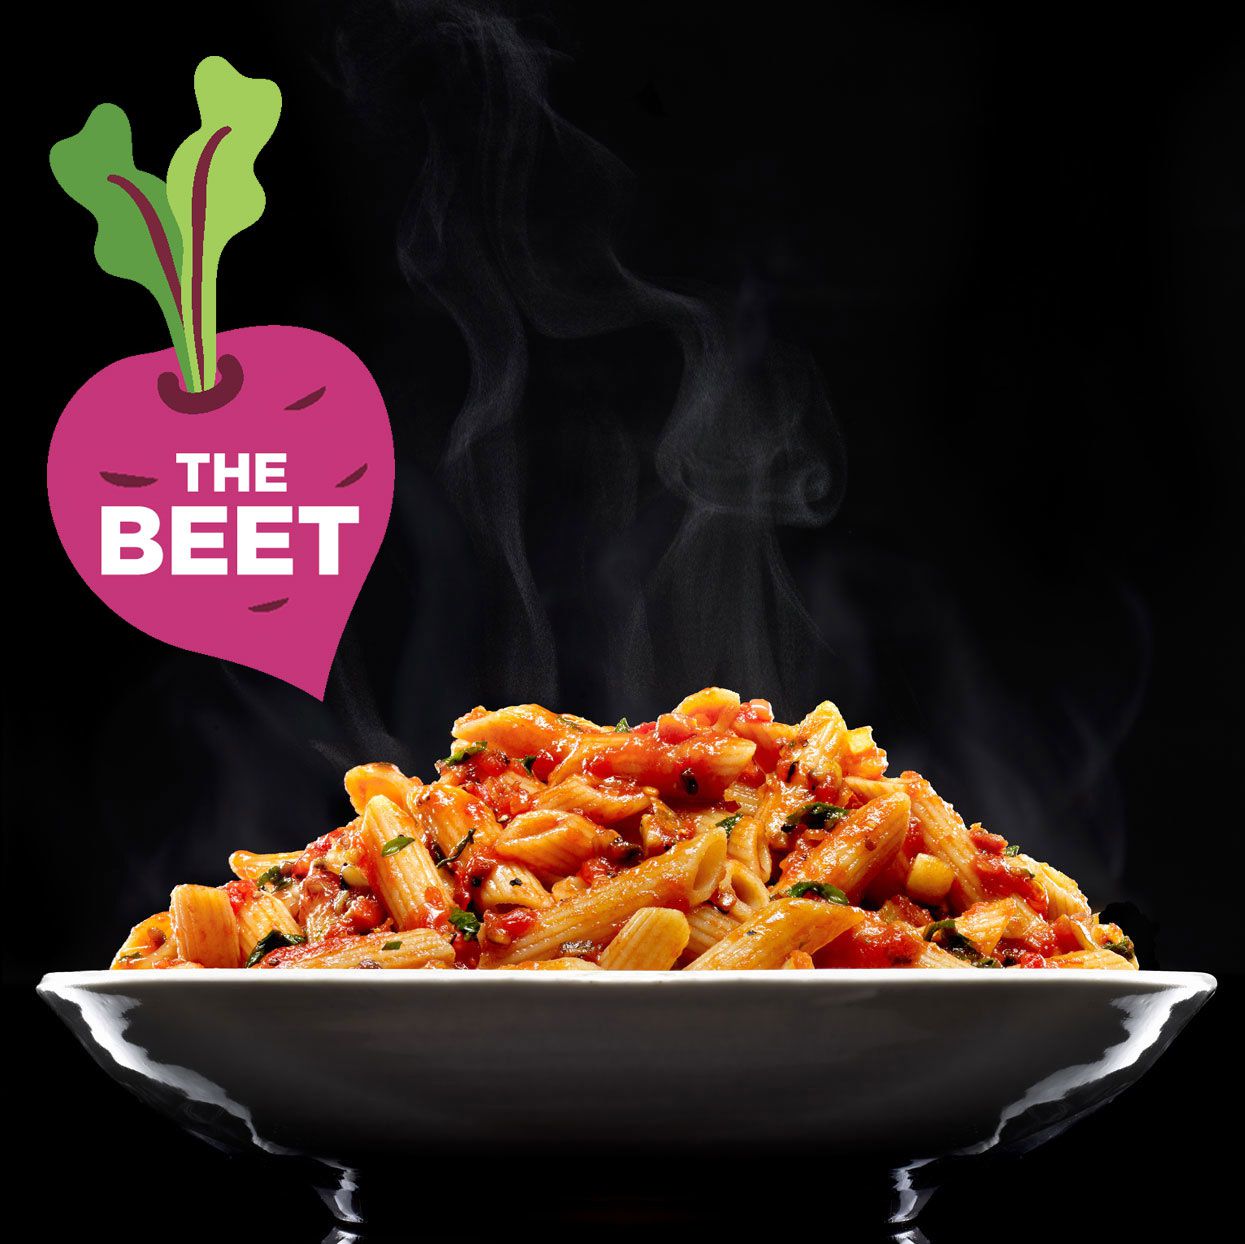 full bowl of pasta with "The Beet" logo on top